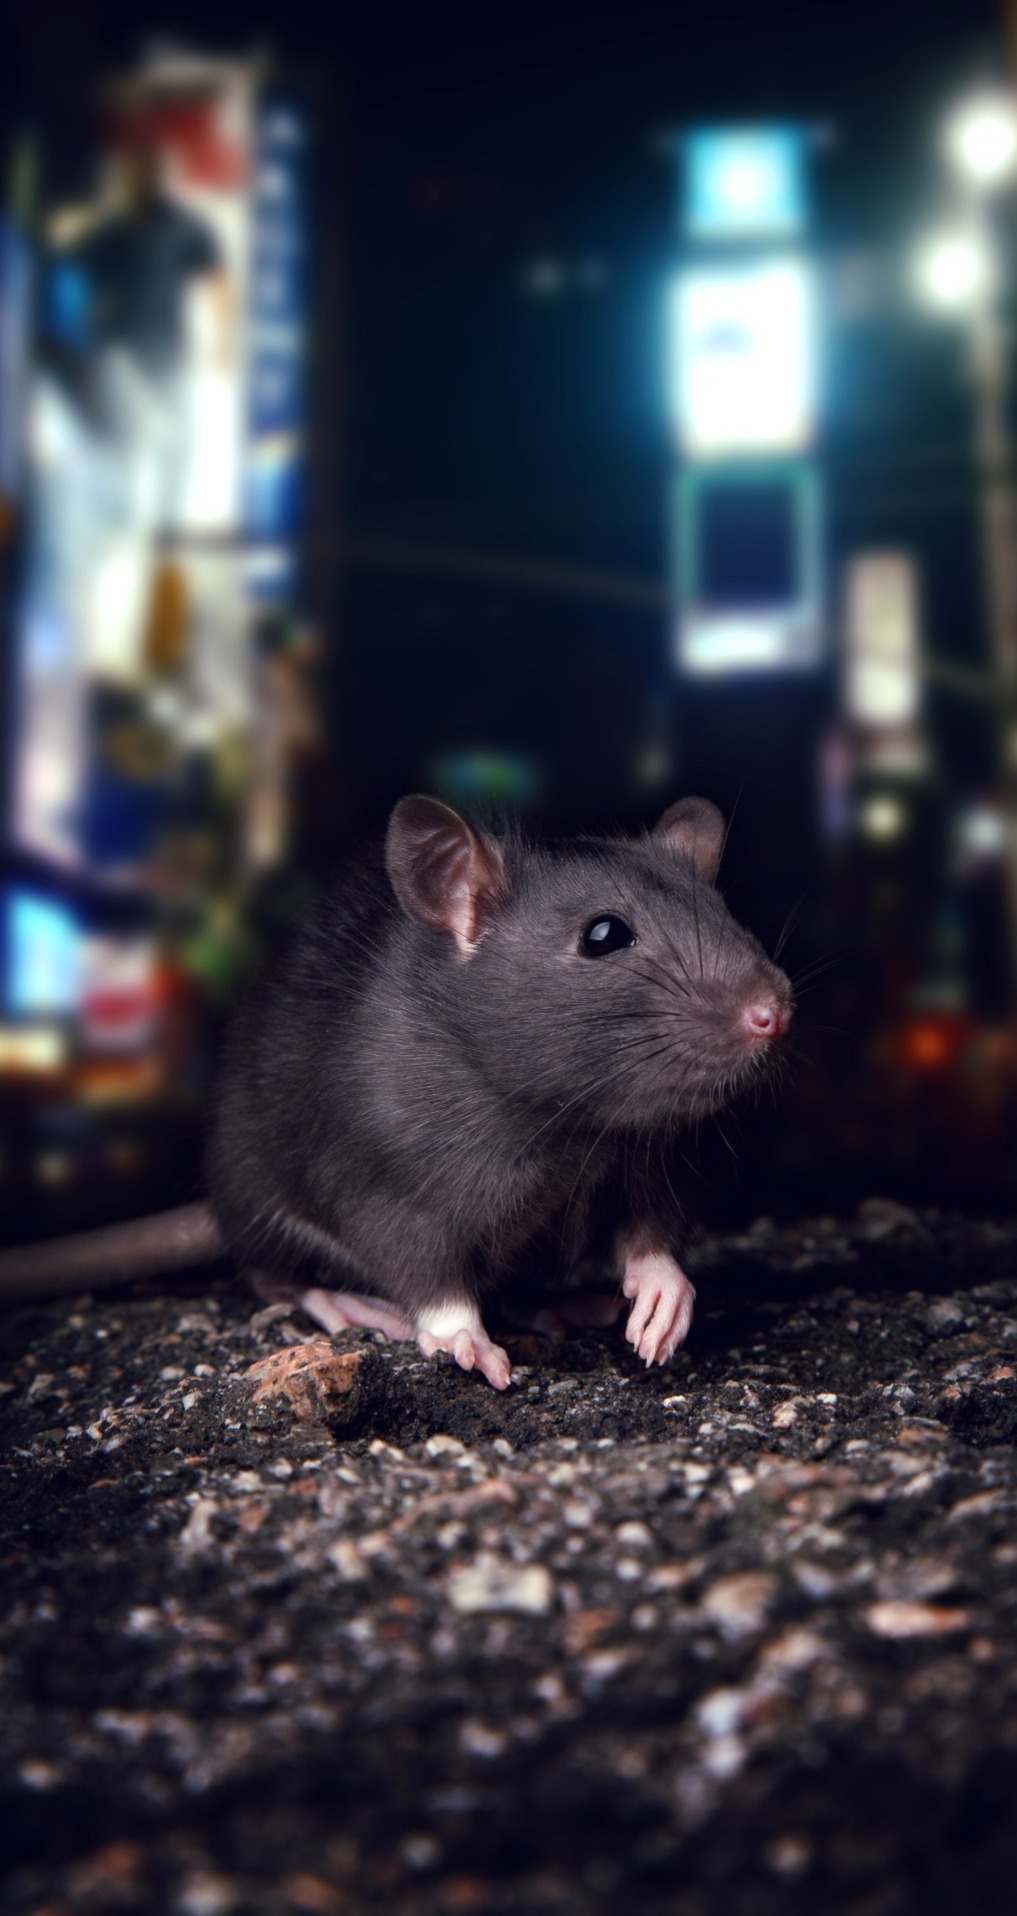 A rat out at night